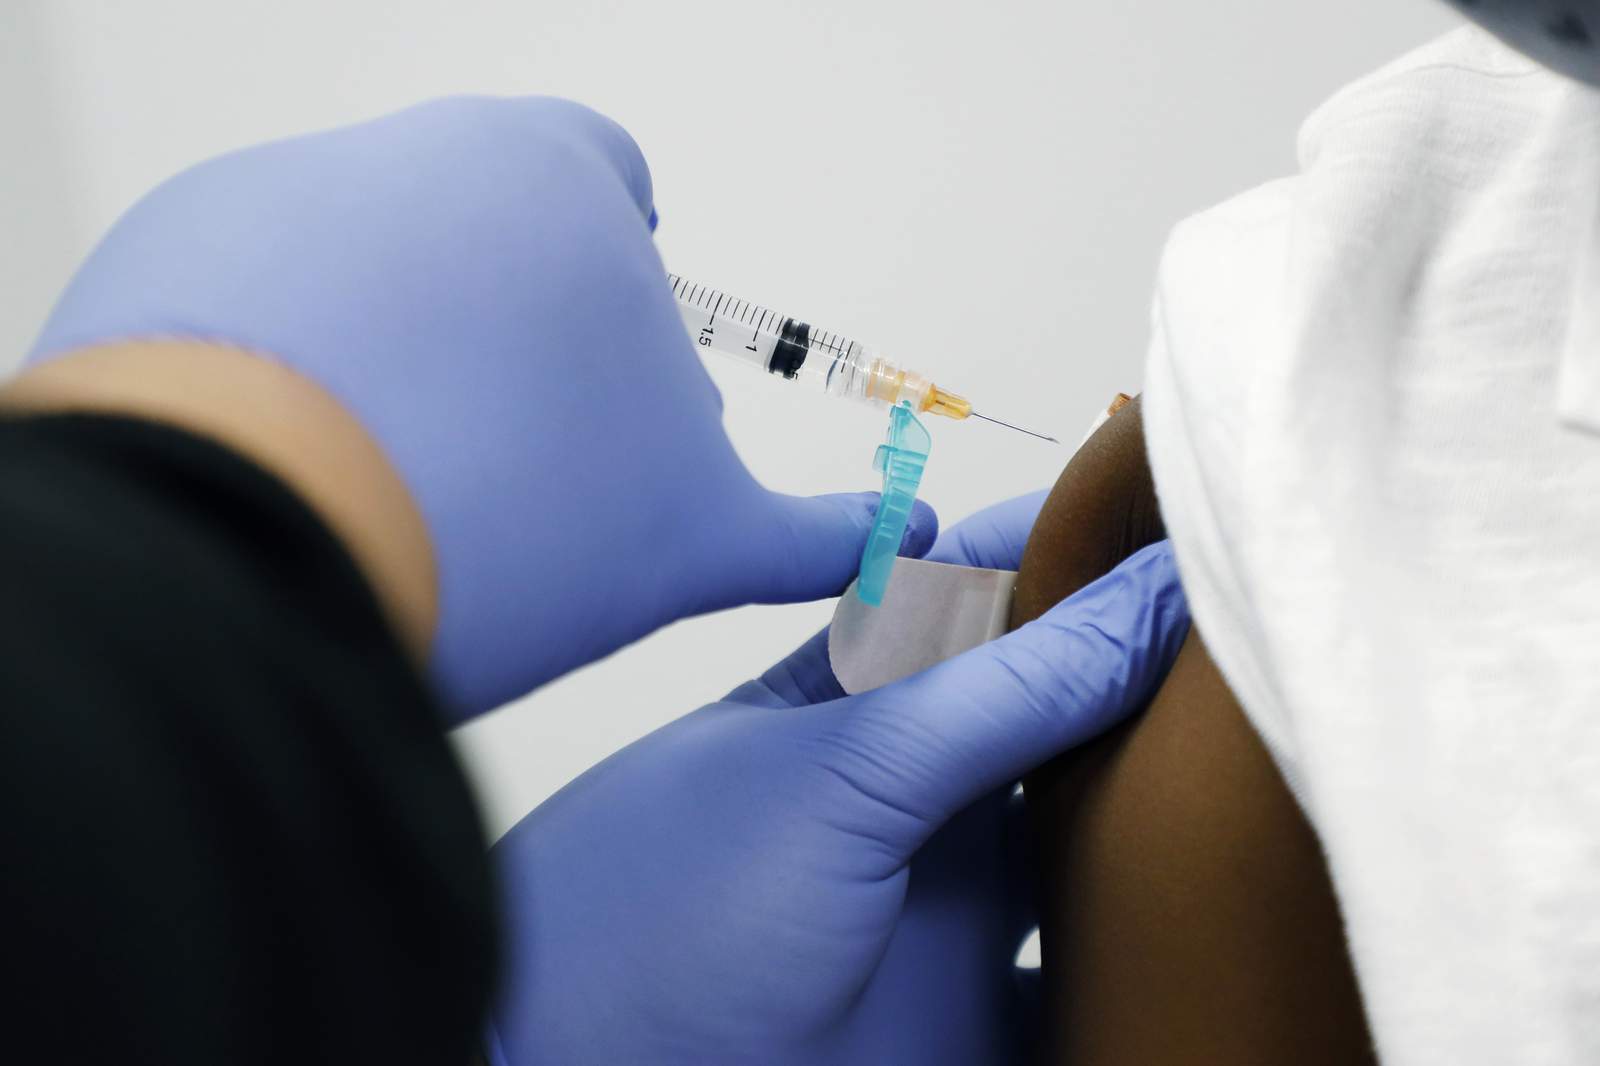 Detroit event to offer free vaccinations, flu shots for children on Sept. 12